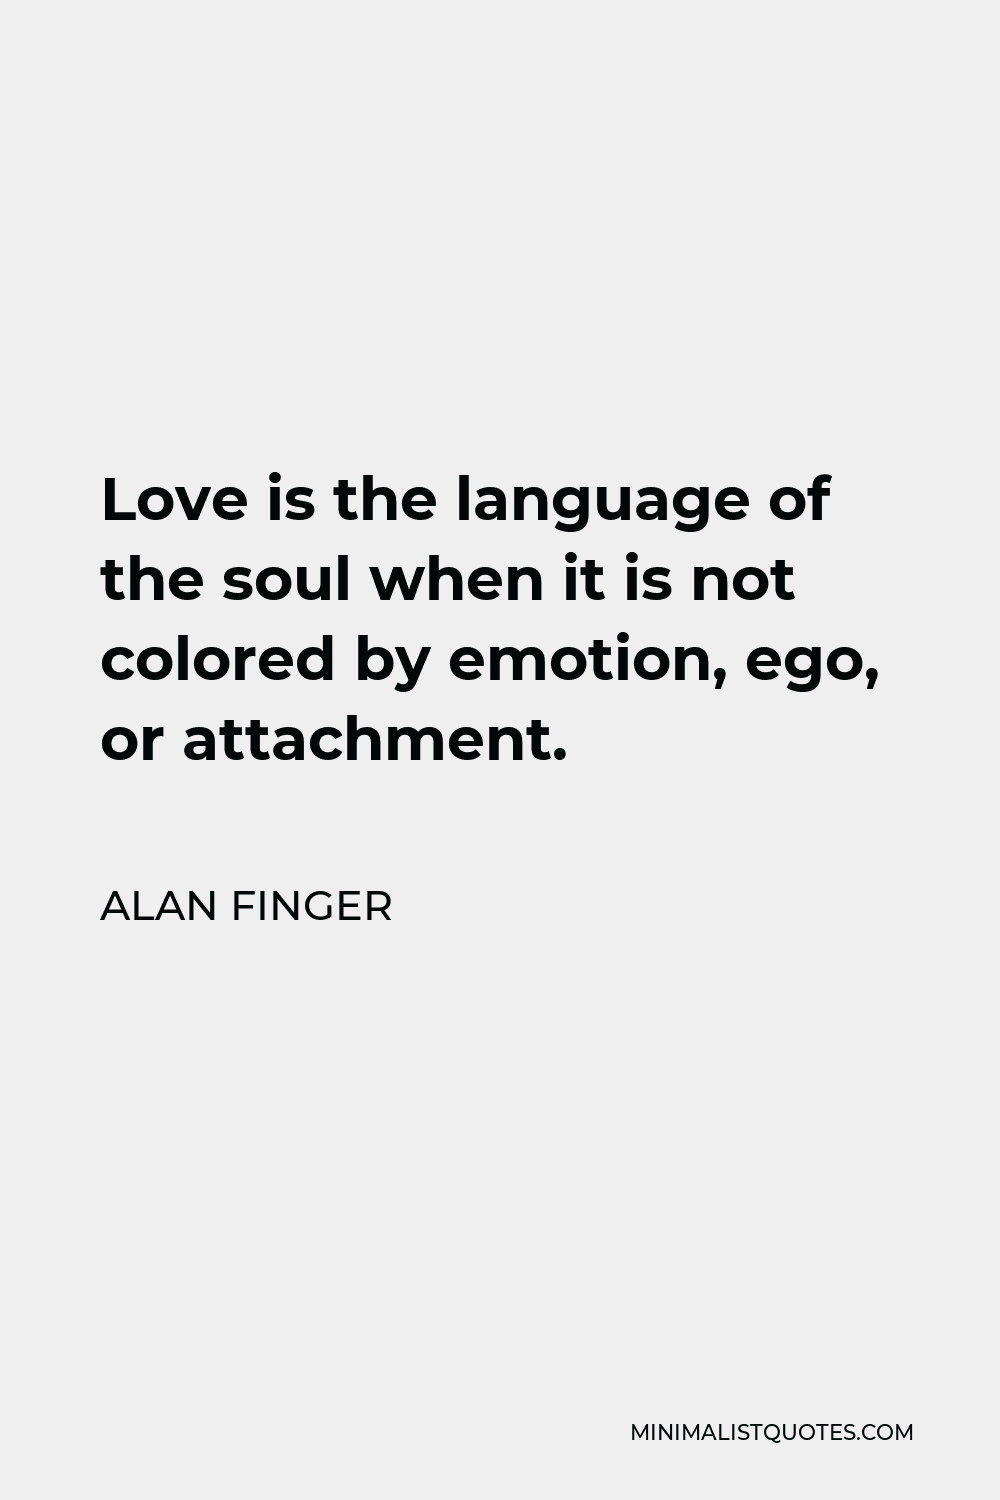 Alan Finger Quote - Love is the language of the soul when it is not colored by emotion, ego, or attachment.